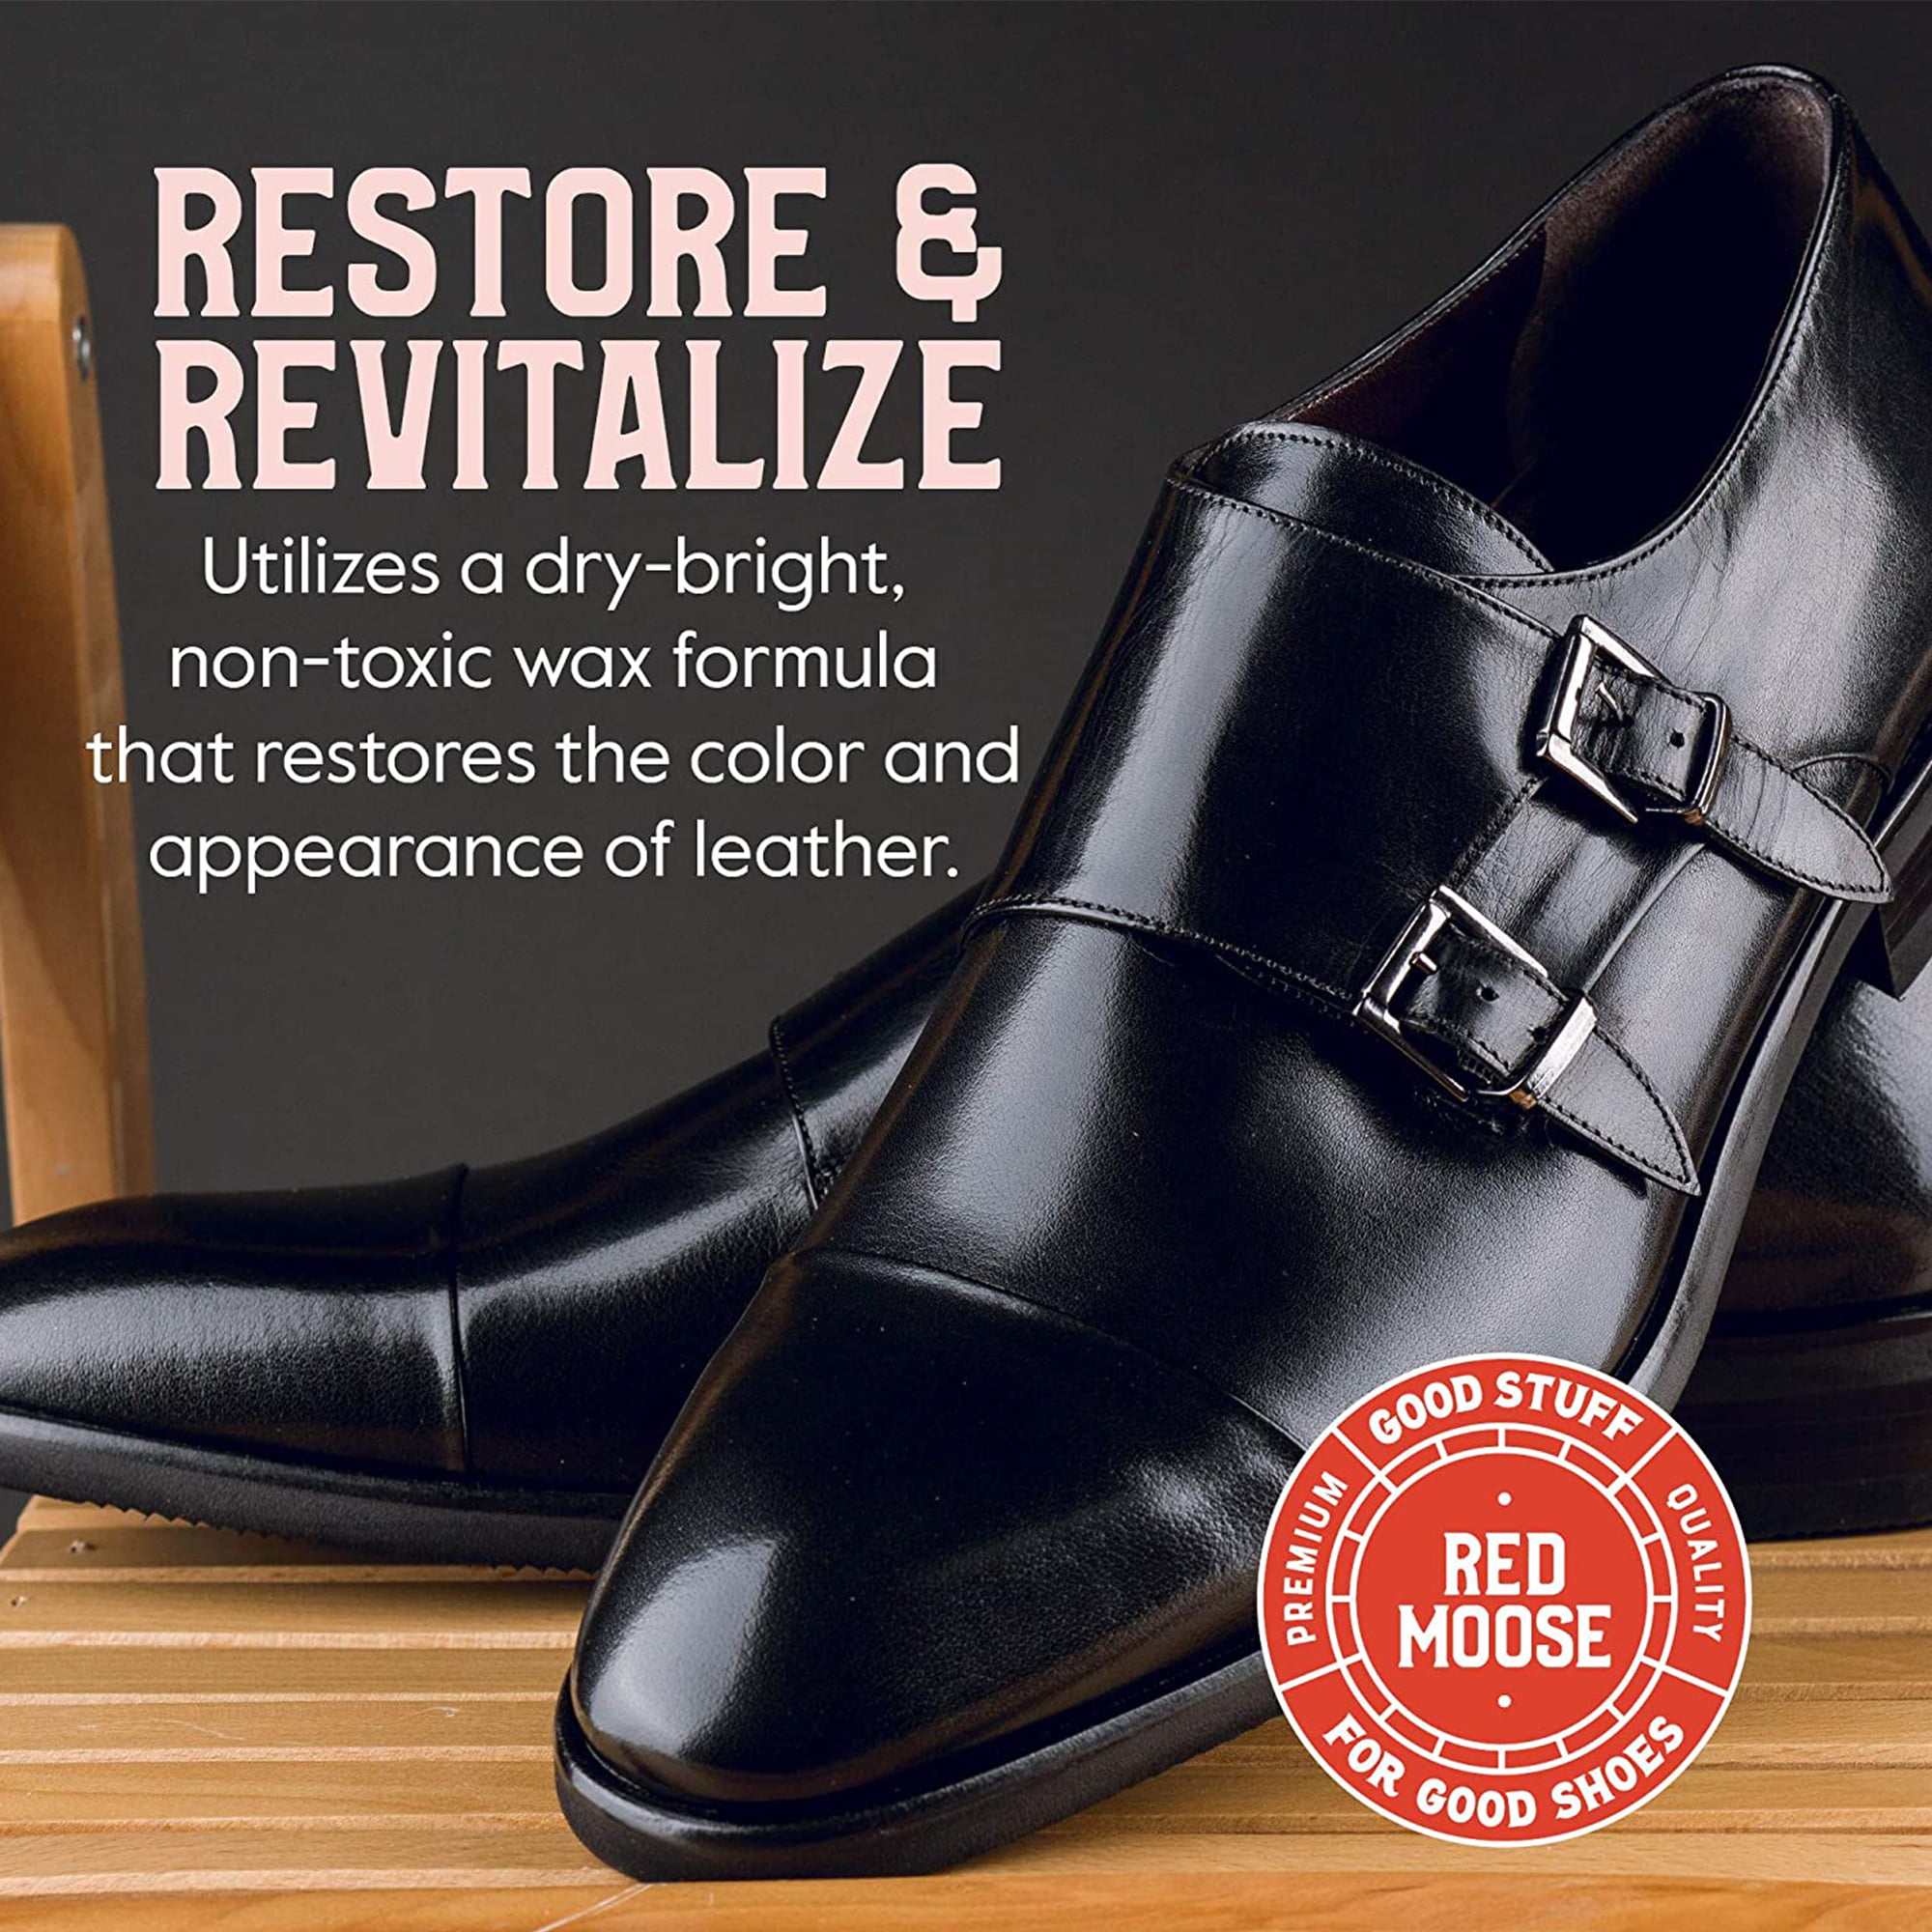 All Natural, Non-Toxic, Shoe Polish | Page 2 | Styleforum